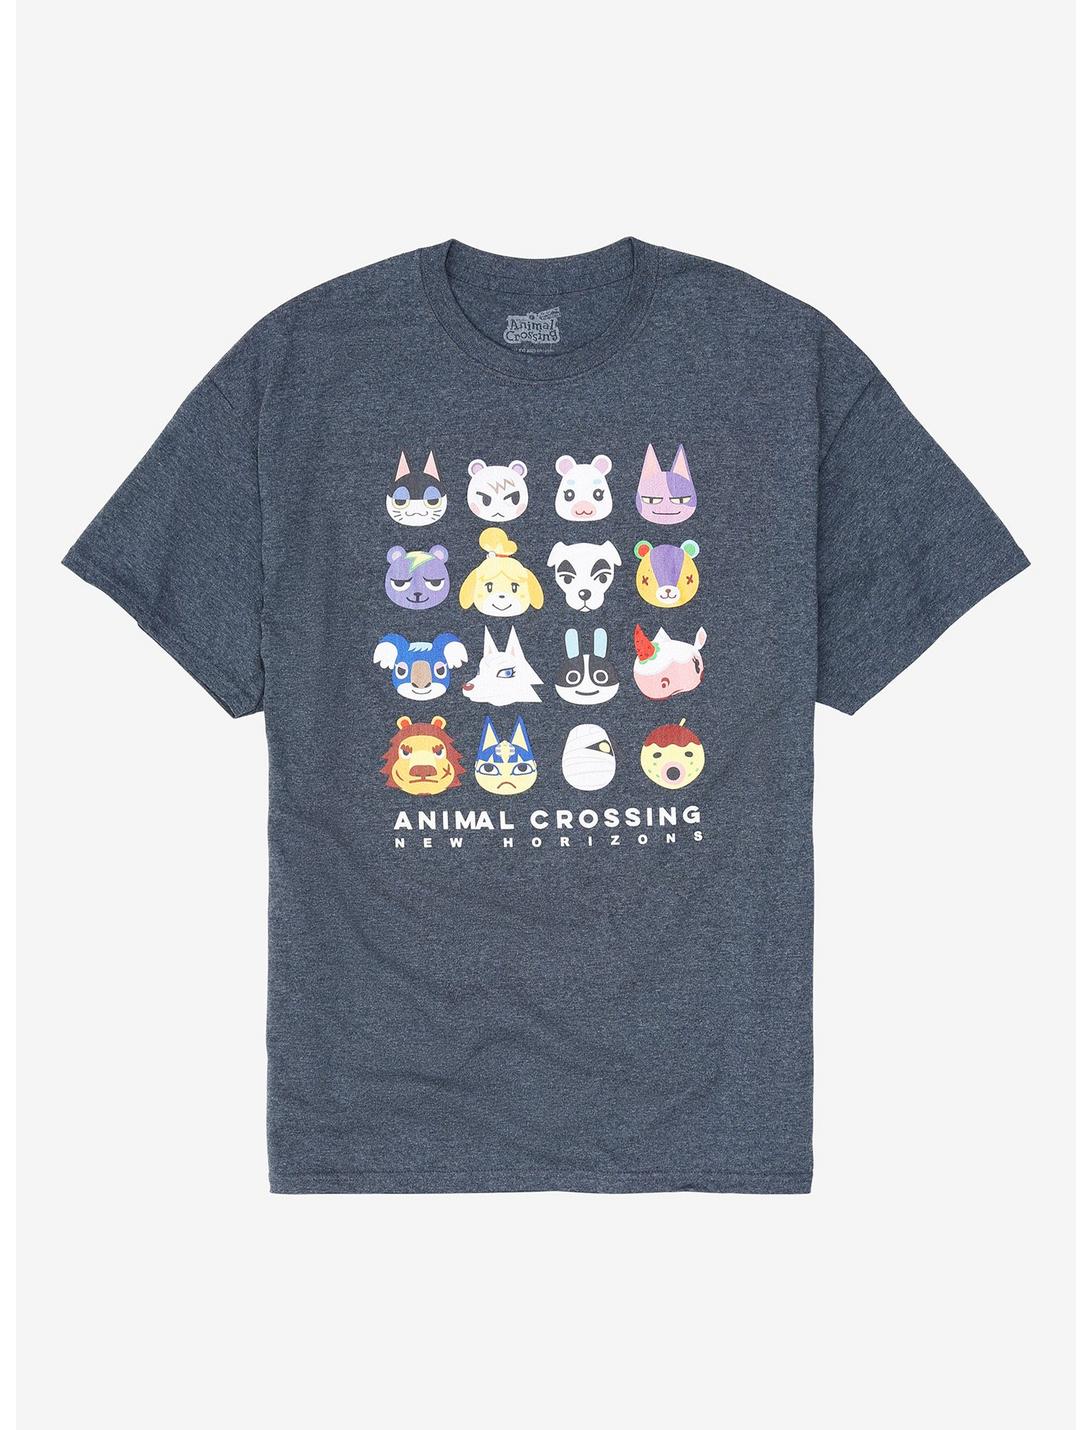 Animal Crossing: New Horizons Characters & Villagers Girls T-Shirt Plus Size, MULTI, hi-res